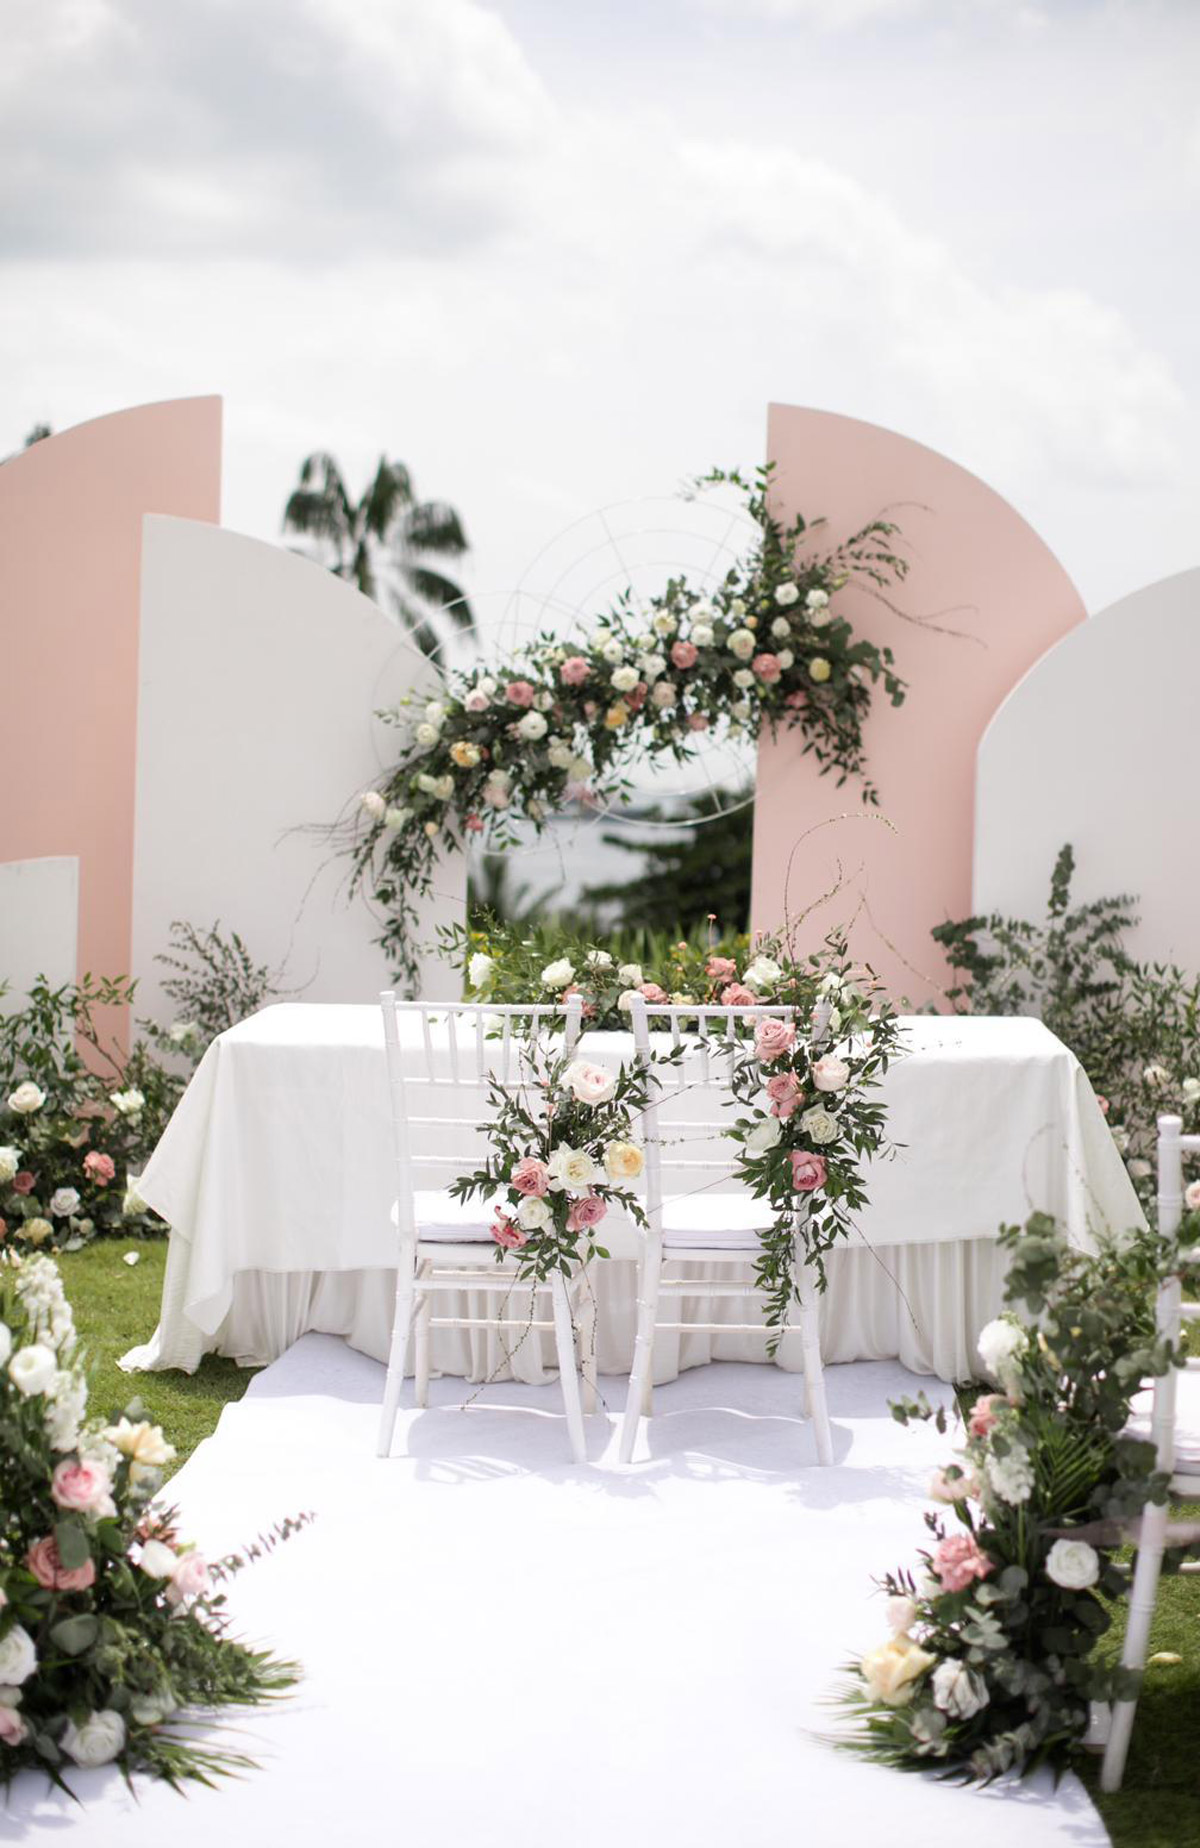 White House: A Whimsical and Ethereal Wedding Affair